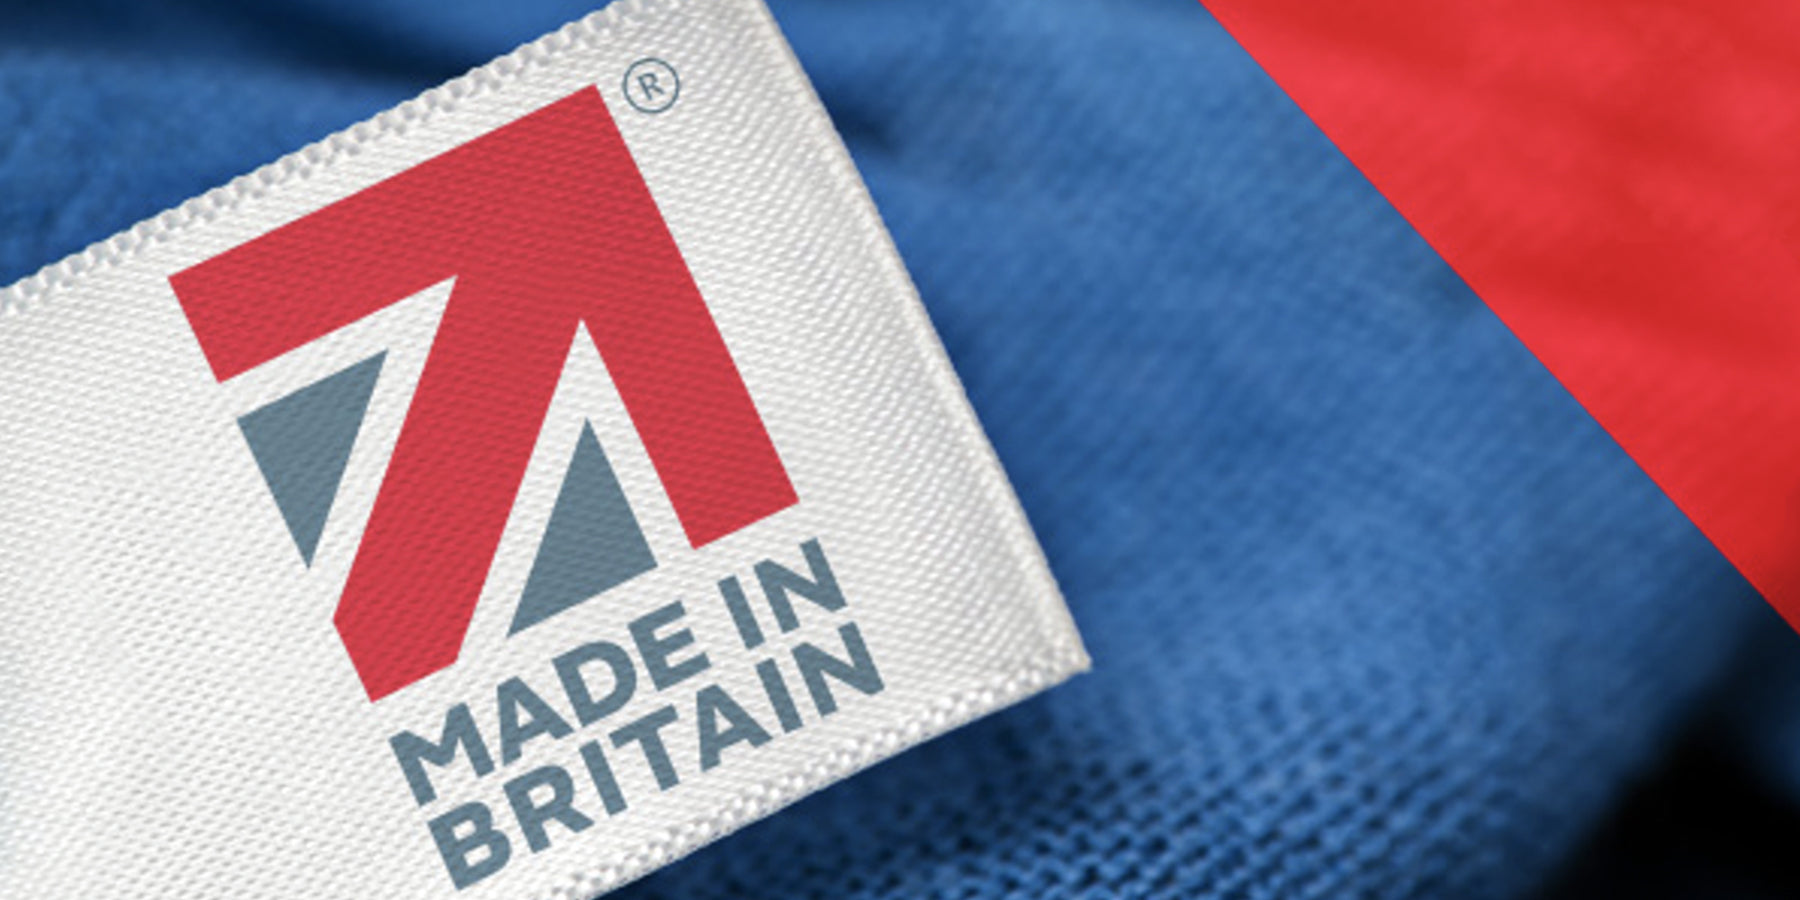 Made in Britain - Manufacturing to the Very Highest Standards in Great Britain